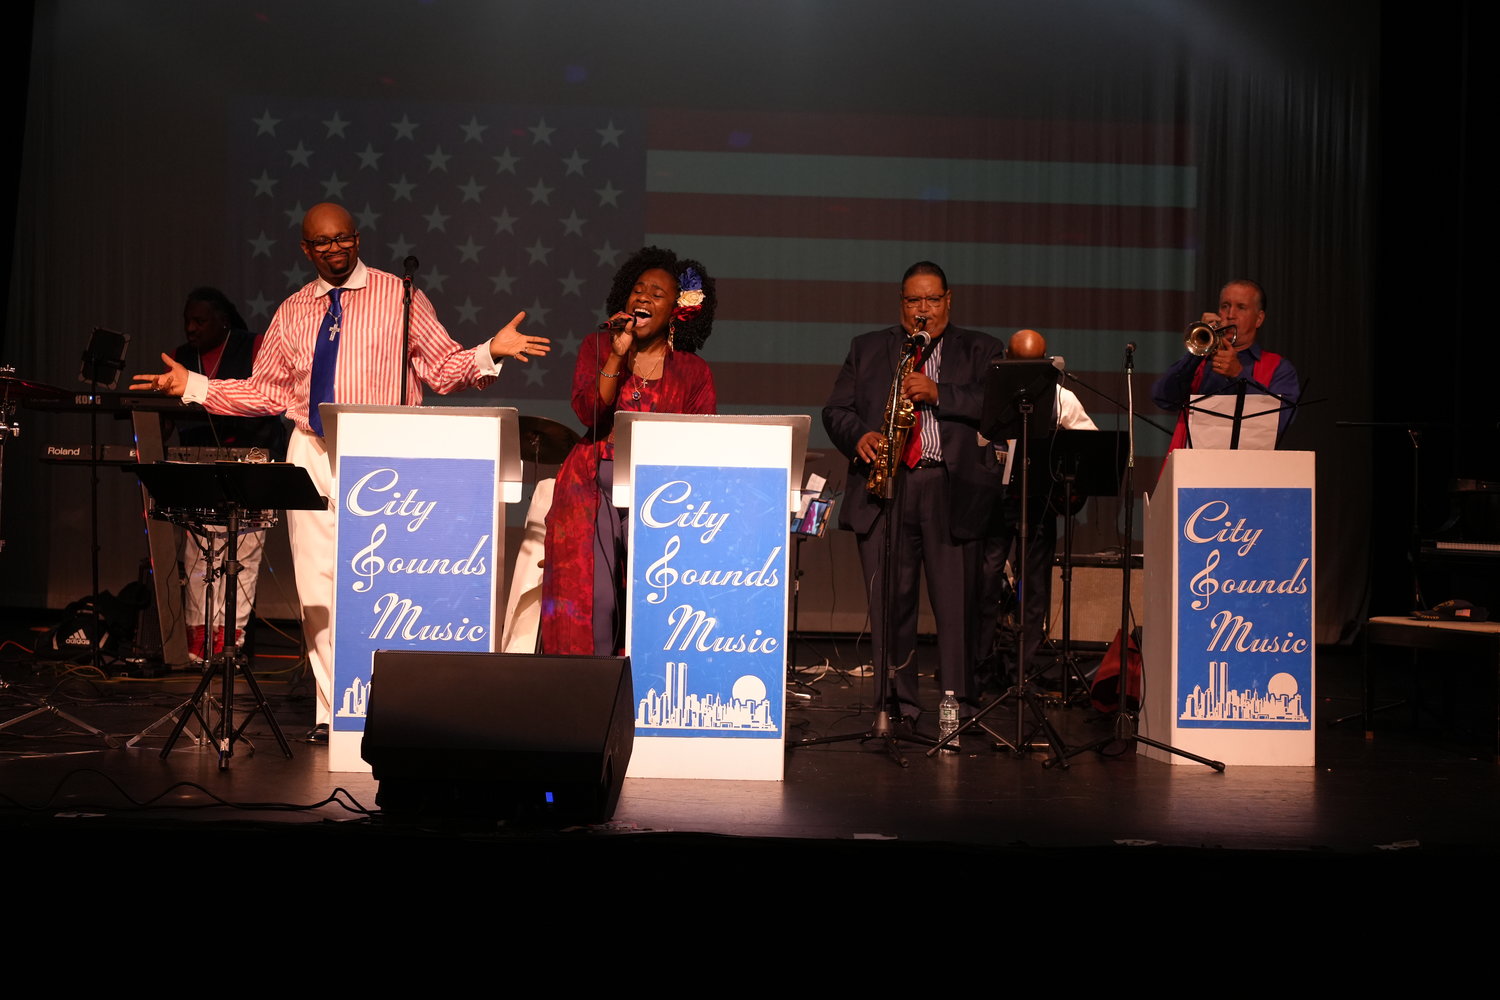 Jerome “City” Smith starred in his second ever Veterans Day Concert with his orchestra group, the City Sounds Ensemble.